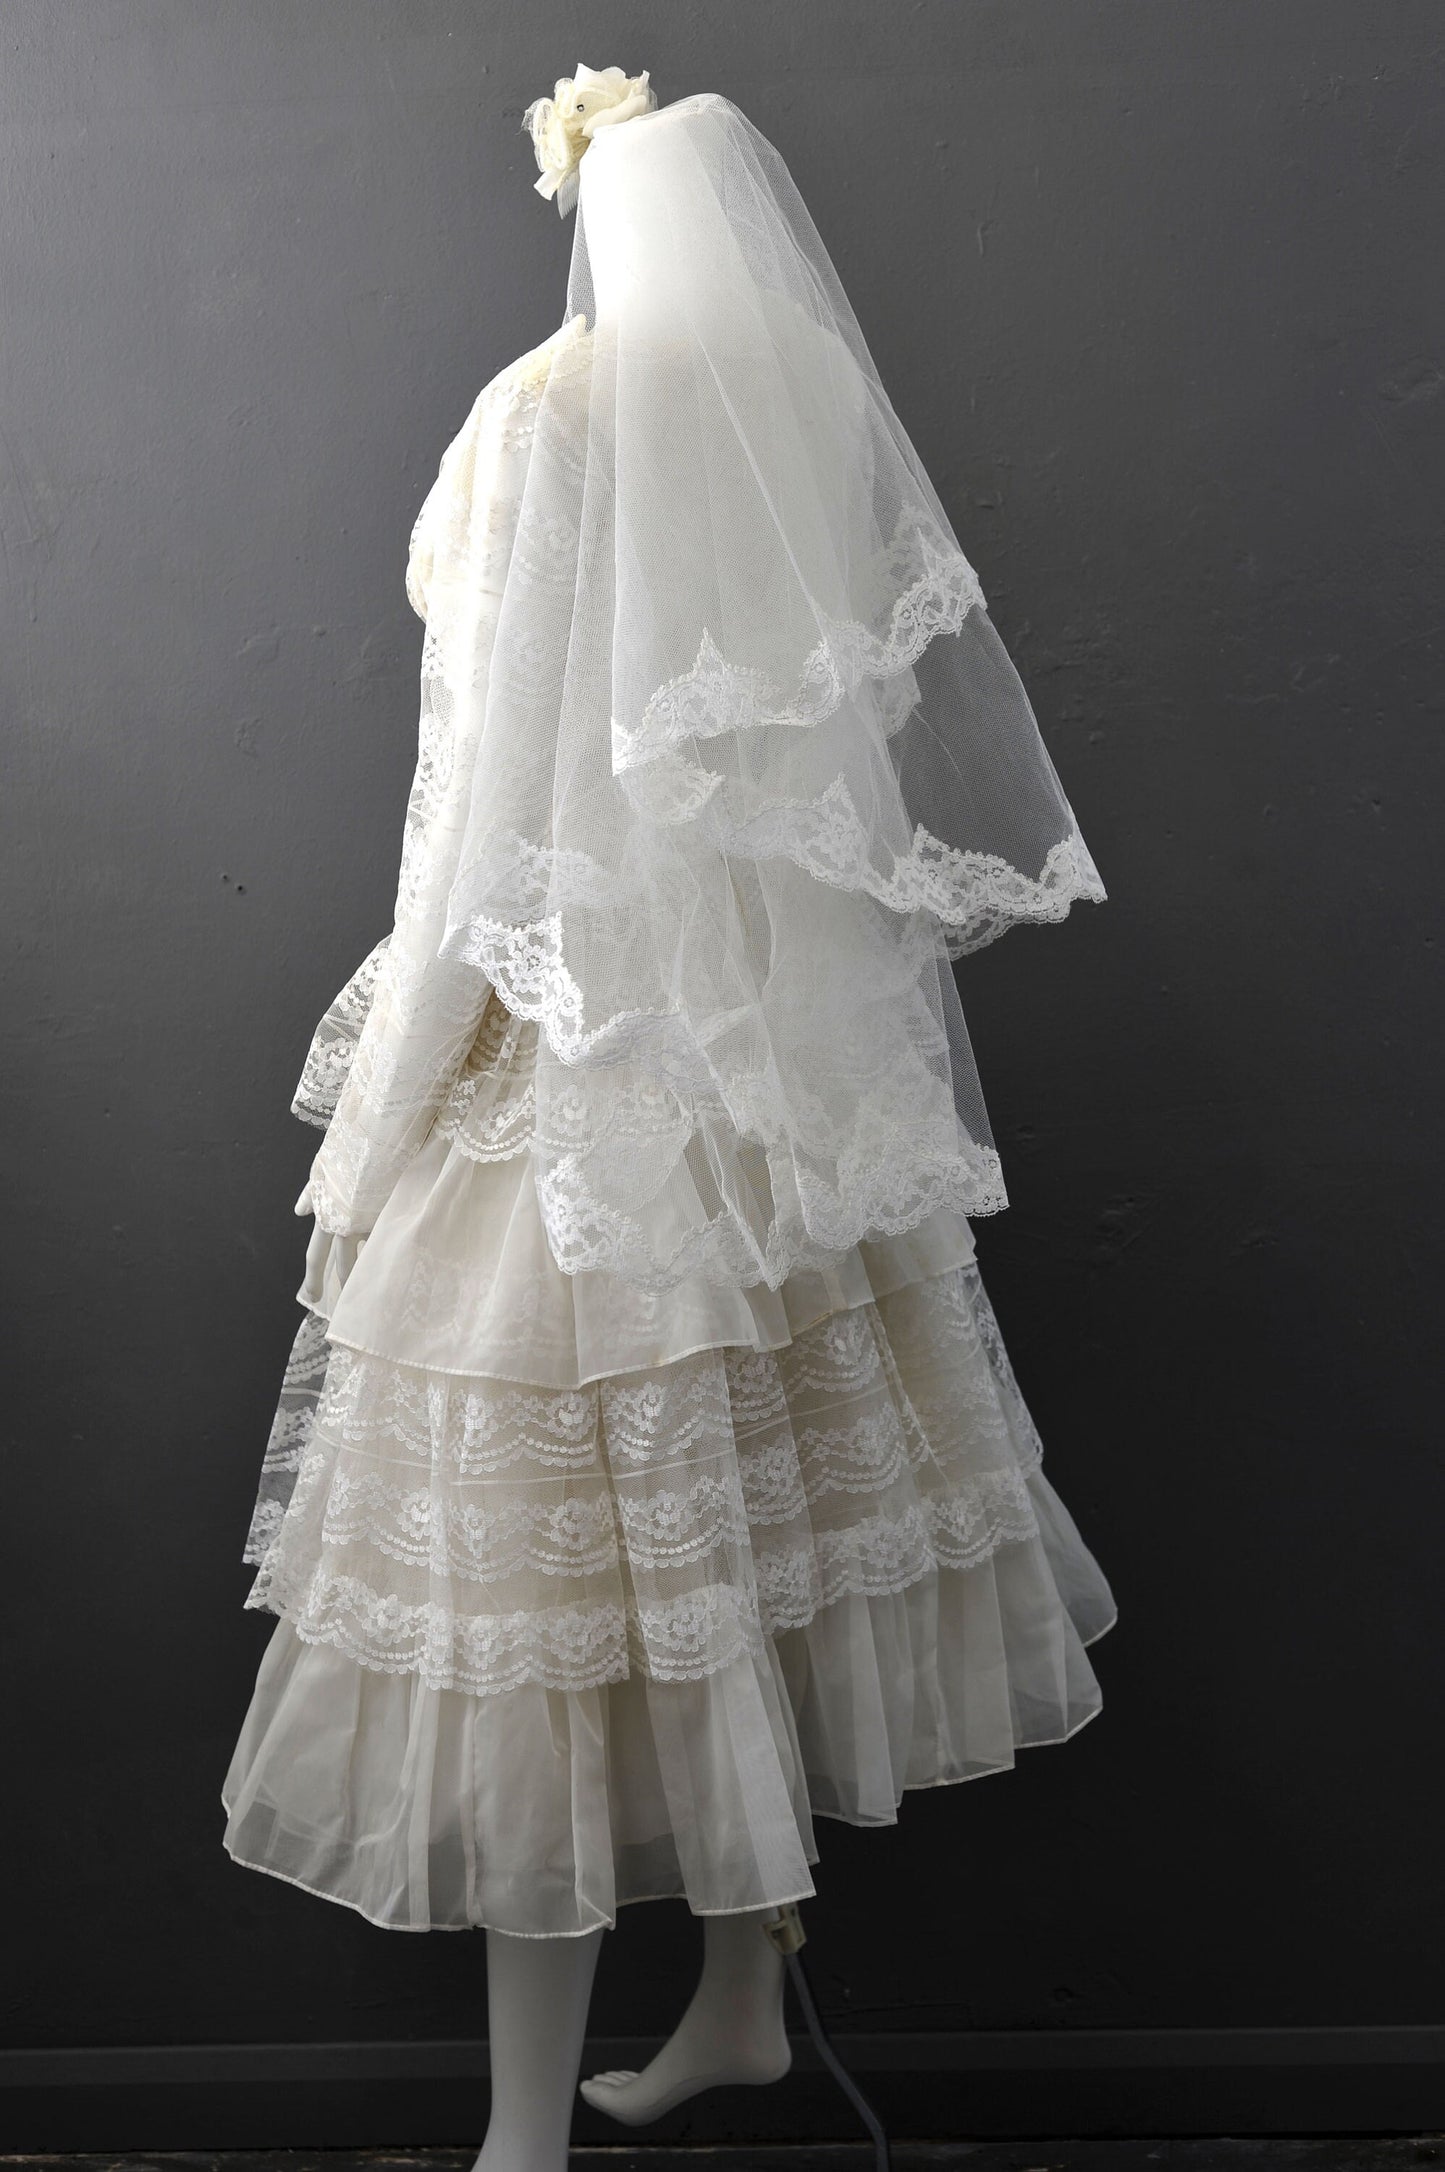 50s Tiered Lace Wedding Dress with Veil, Tea Length with Scalloped Boatneck, Size Small